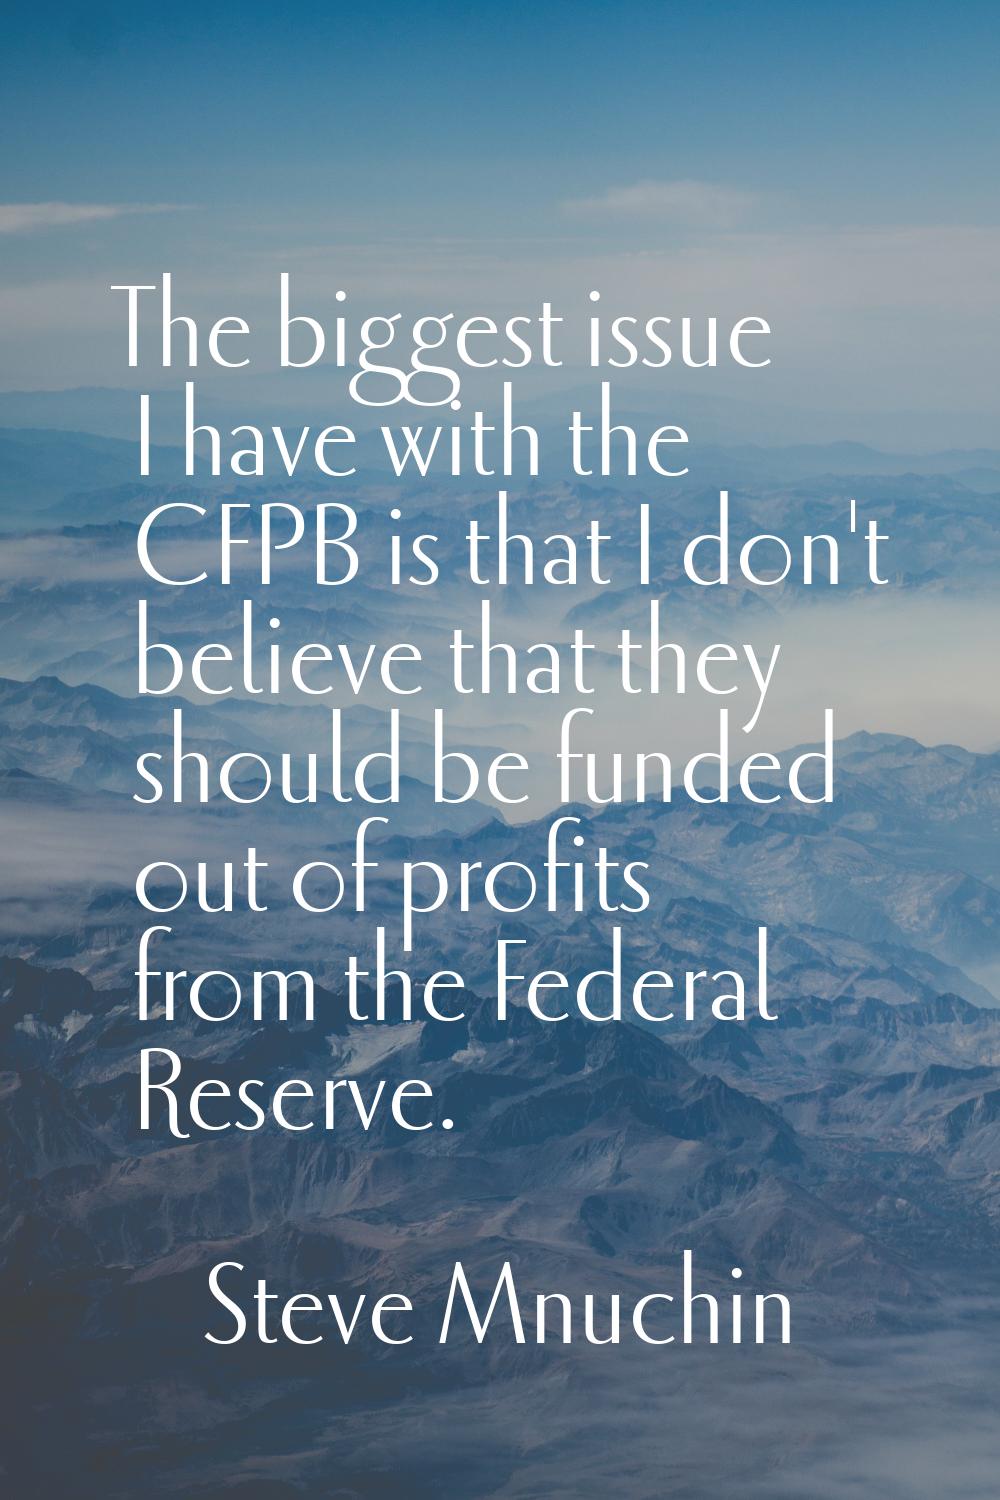 The biggest issue I have with the CFPB is that I don't believe that they should be funded out of pr